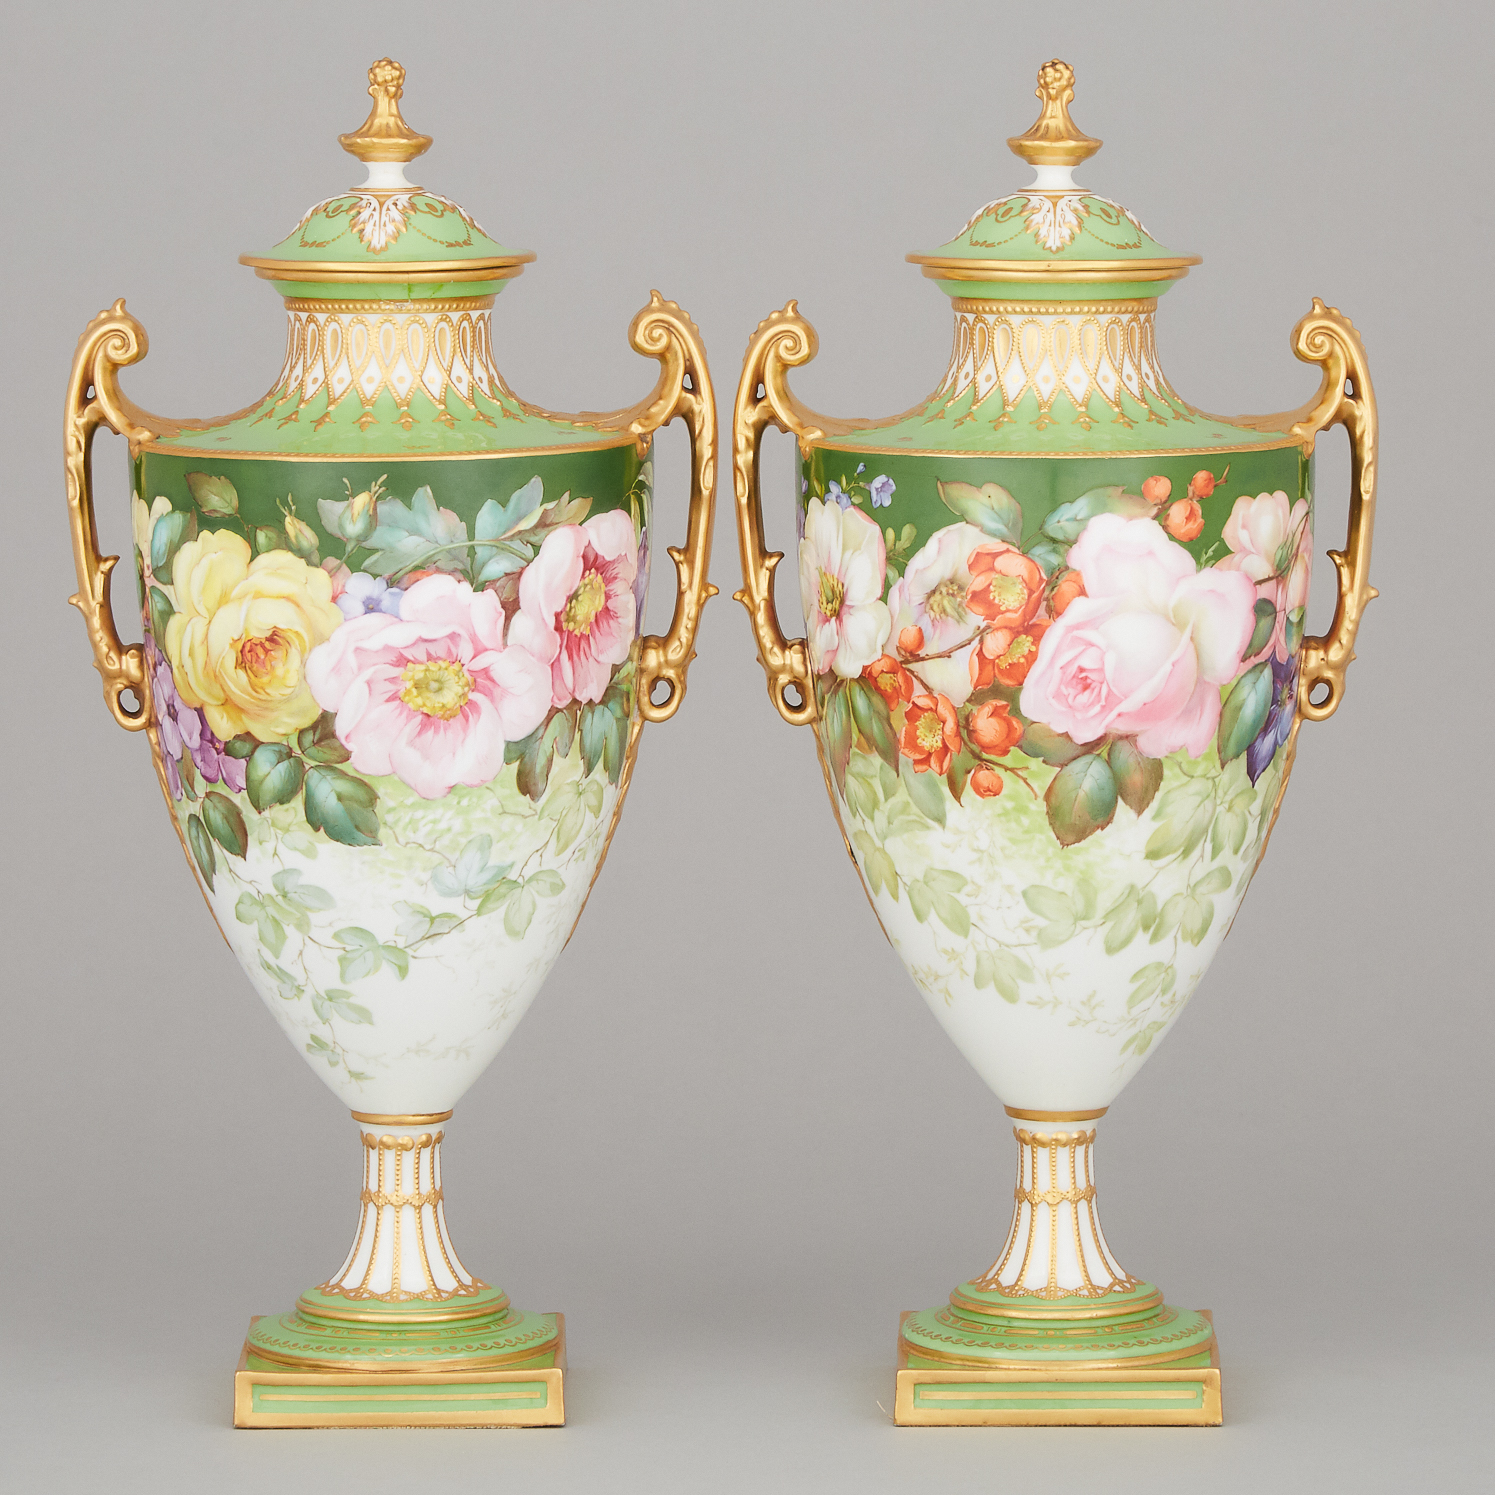 Pair of Royal Crown Derby Apple Green Ground Two-Handled Vases with Covers, Albert Gregory, 1906/08